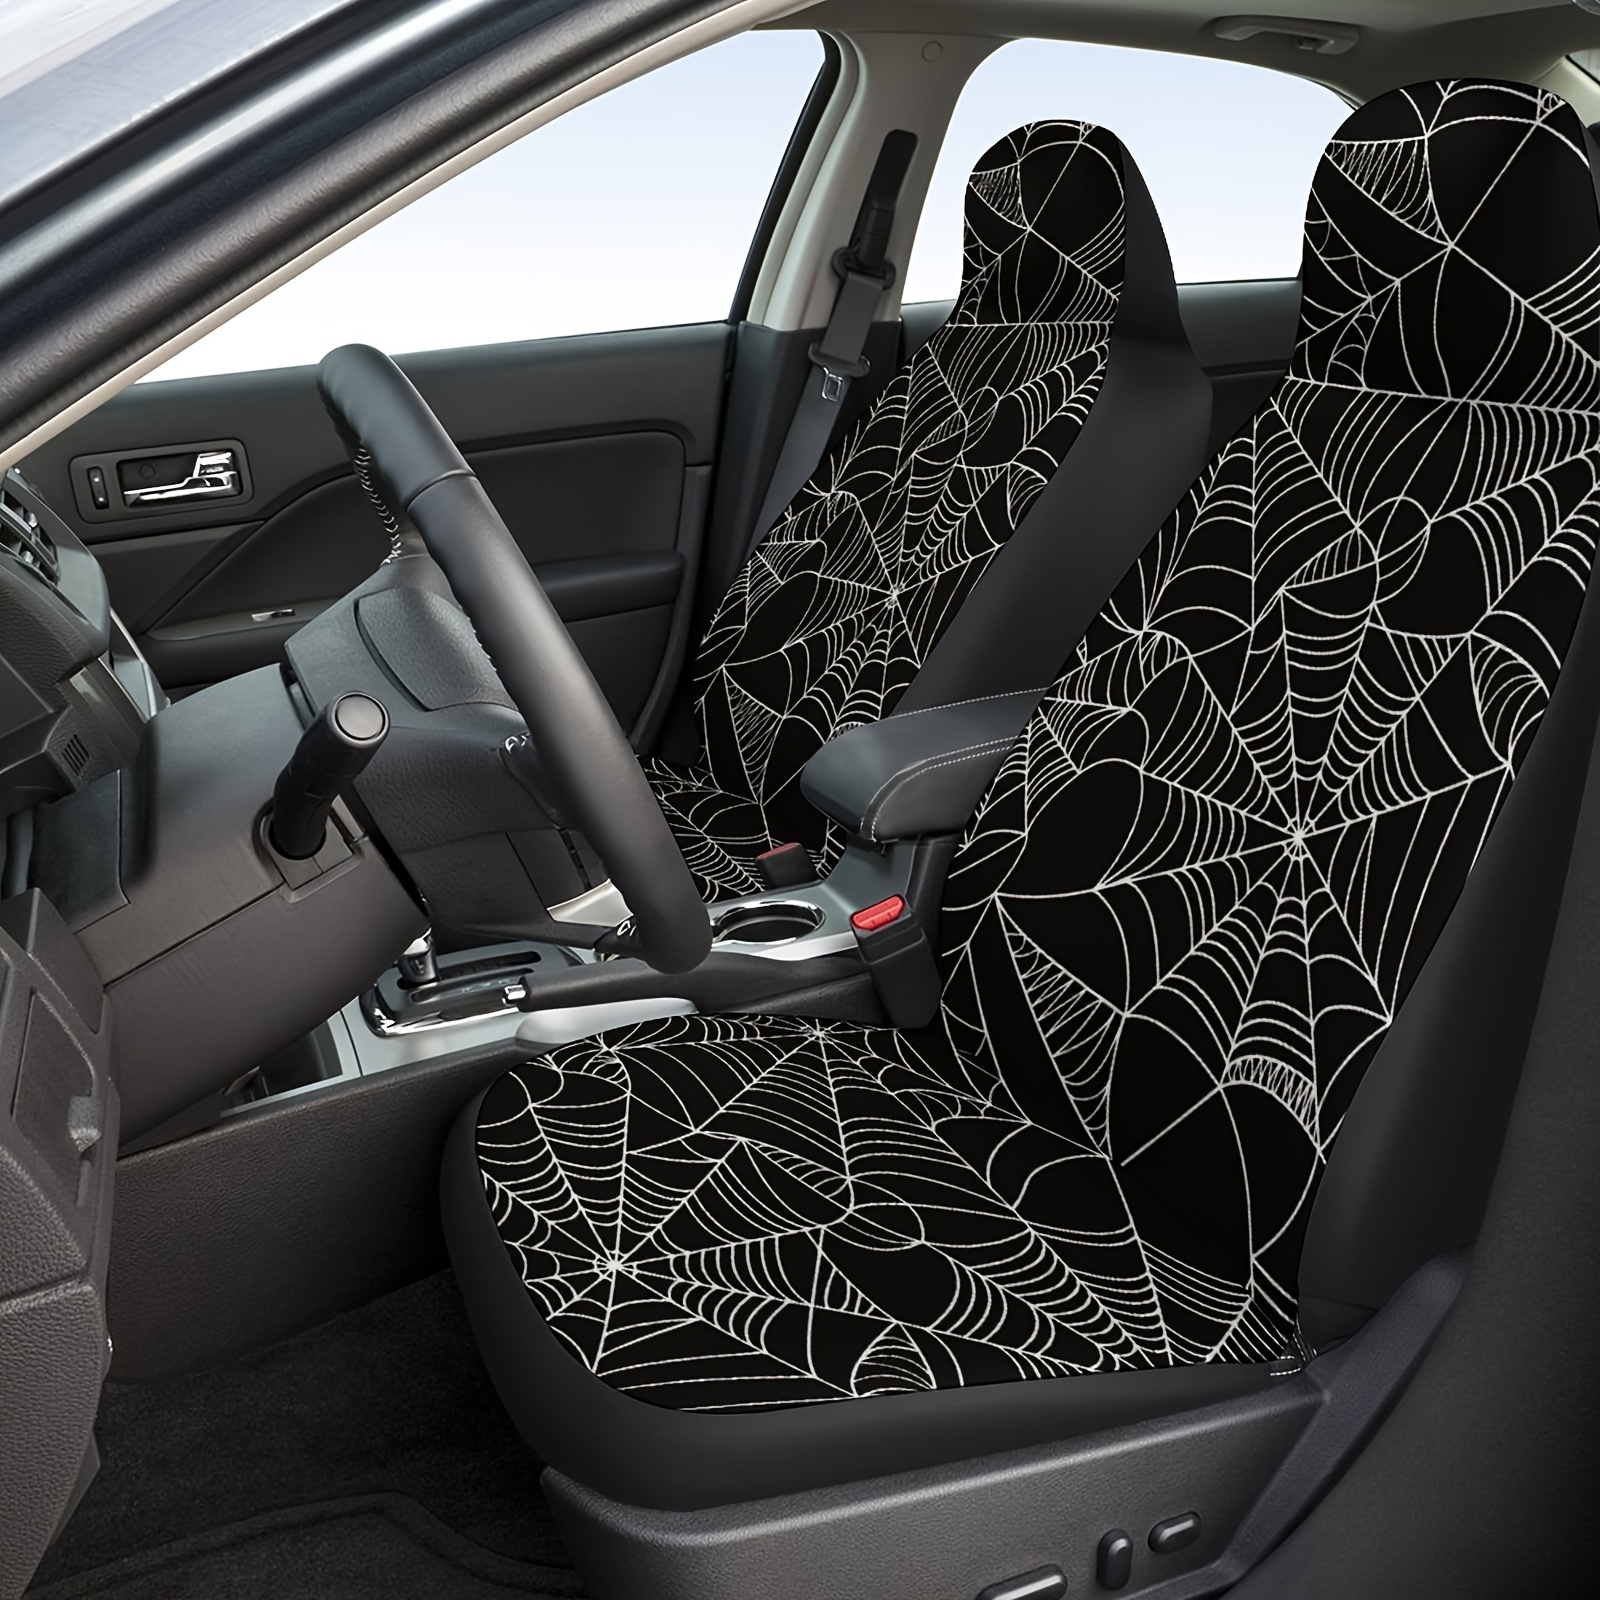 

1pc Spider Web Black And White Print Car Universal Driving Seat Cover Halloween Christmas Gift